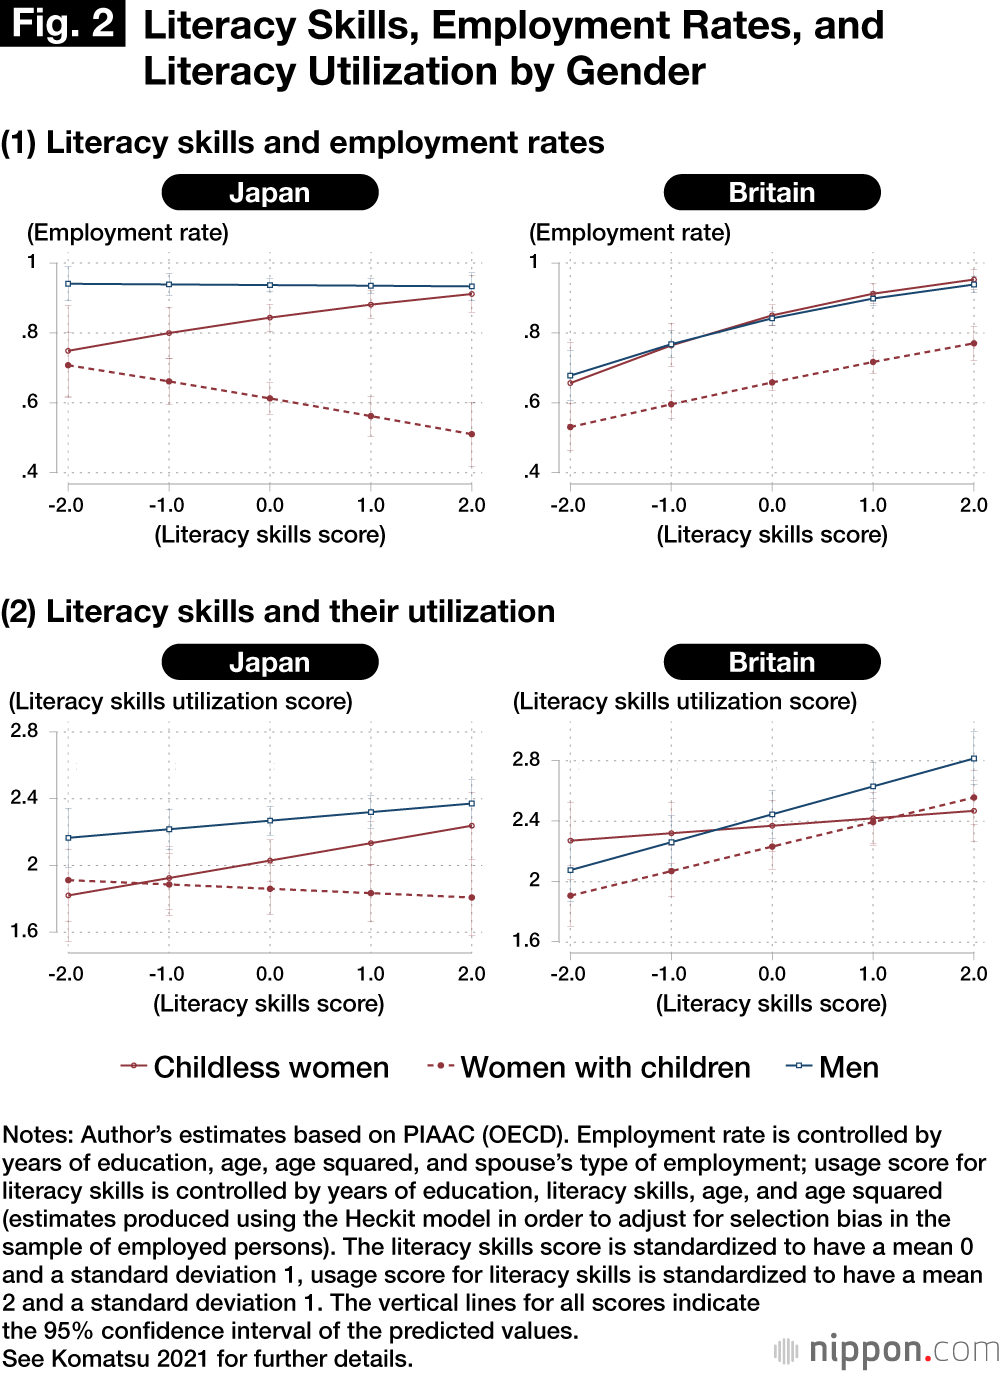 Fig. 2: Literacy Skills, Employment Rates, and Literacy Utilization by Gender